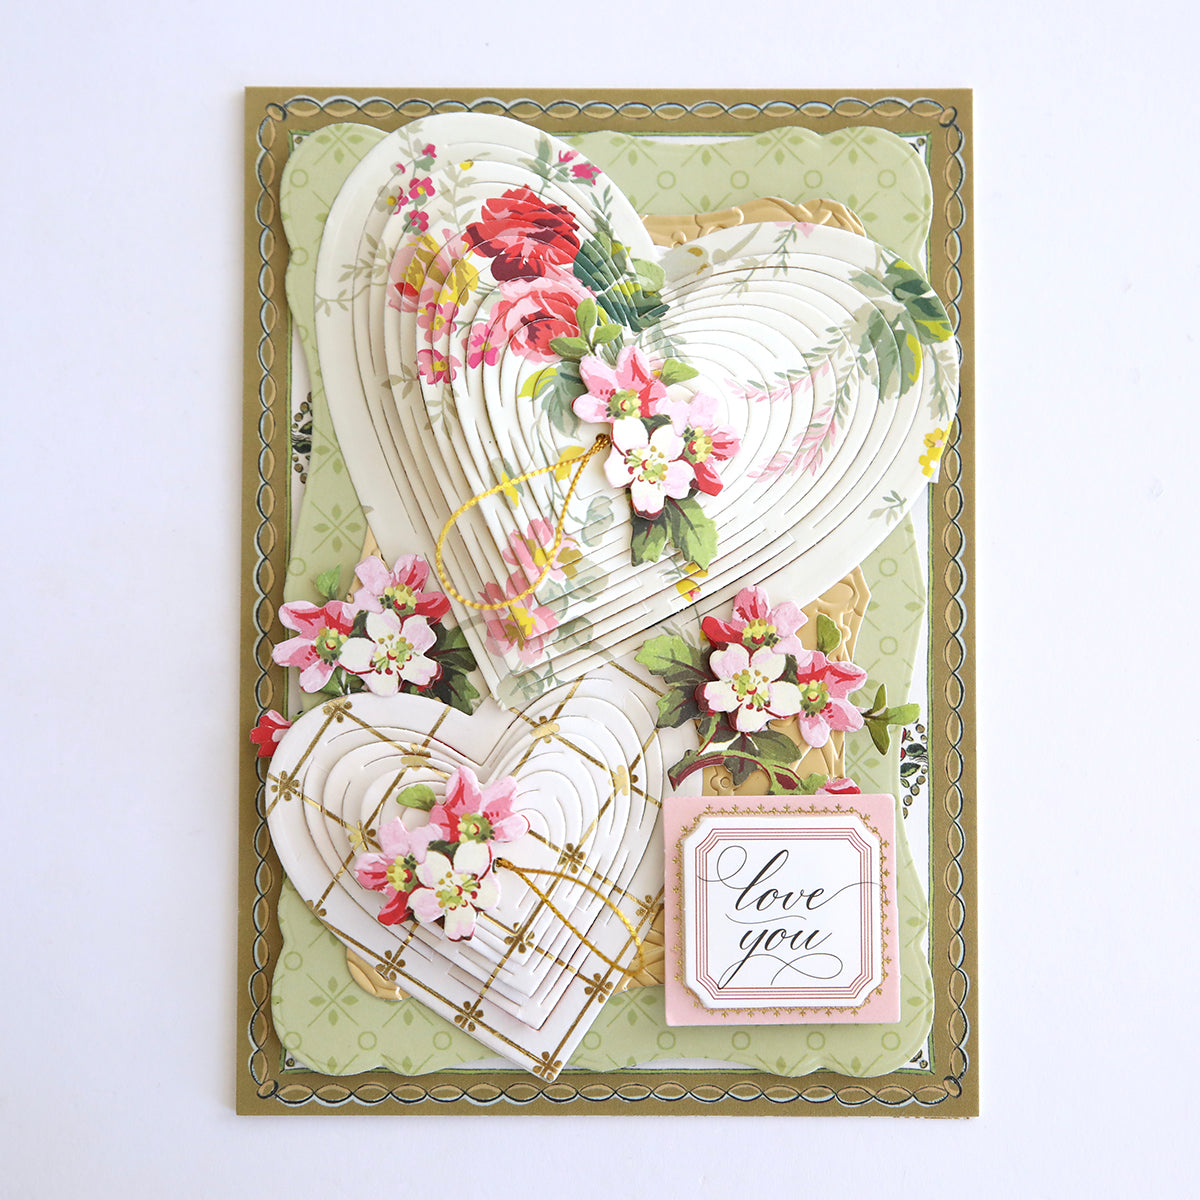 A delicate valentine's day card inspired by the Japanese technique, featuring hearts and flowers made with Heart Kirigami Dies.